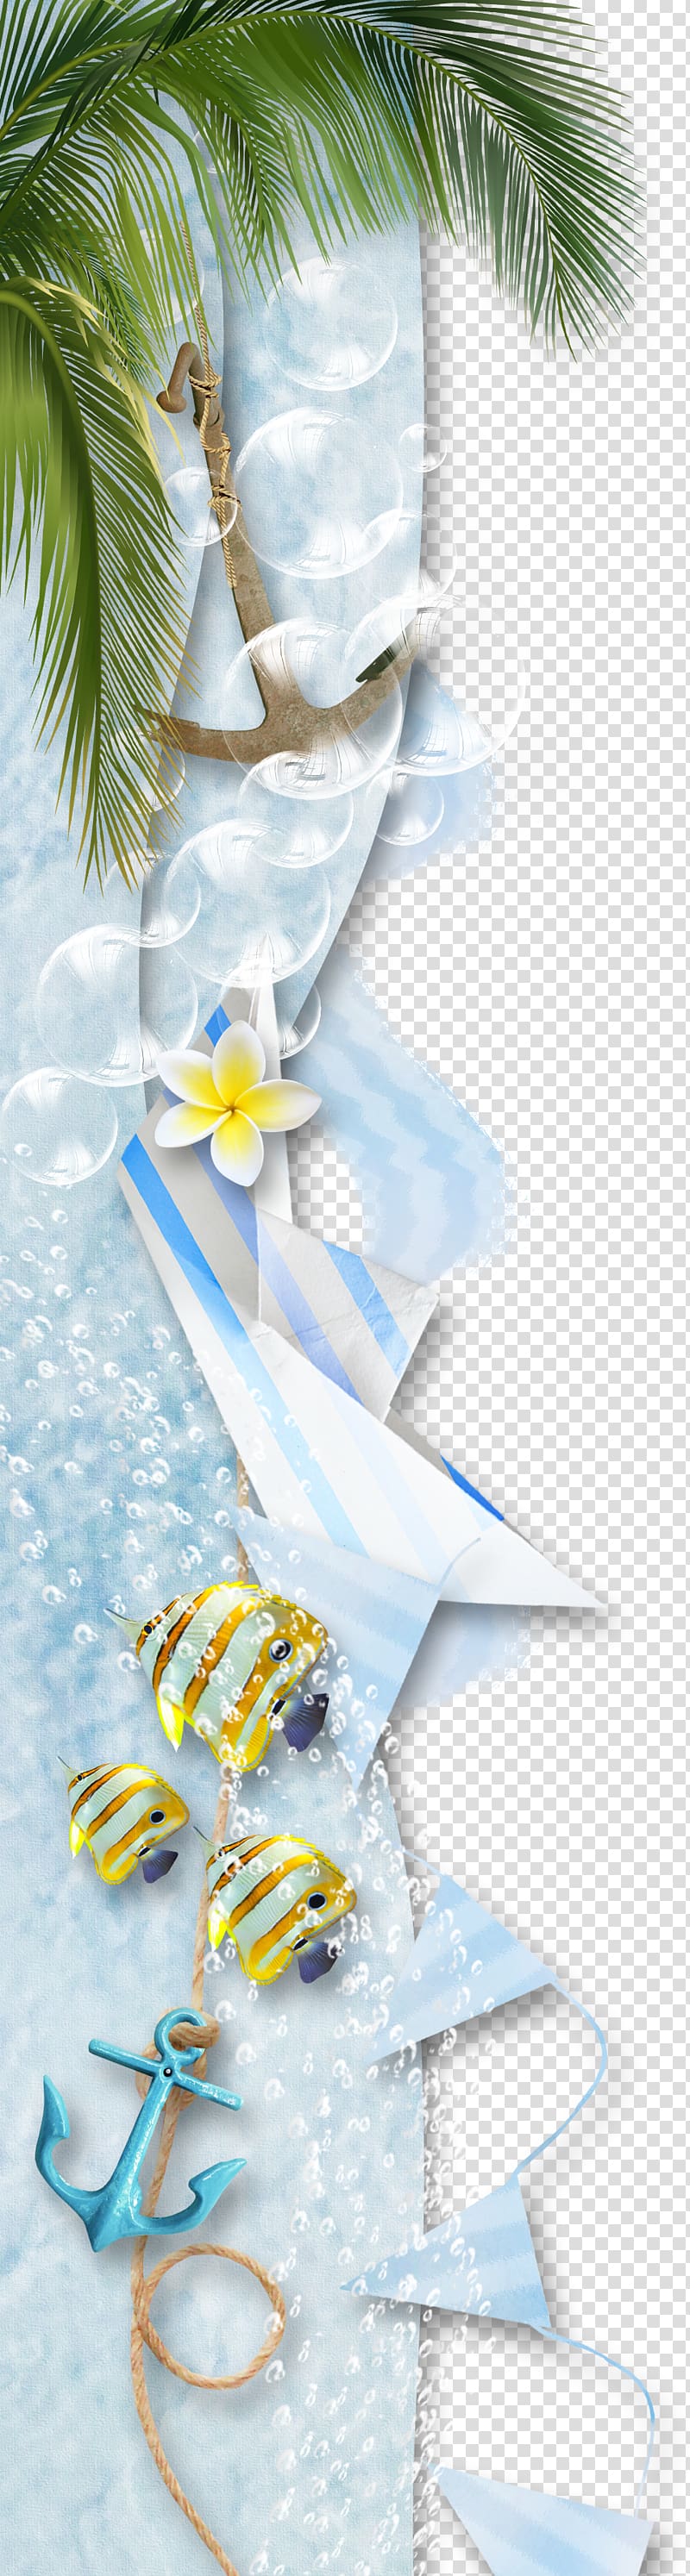 Scrapbooking , Coconut tree Barb rope, white and blue buntings digital wallpaer transparent background PNG clipart